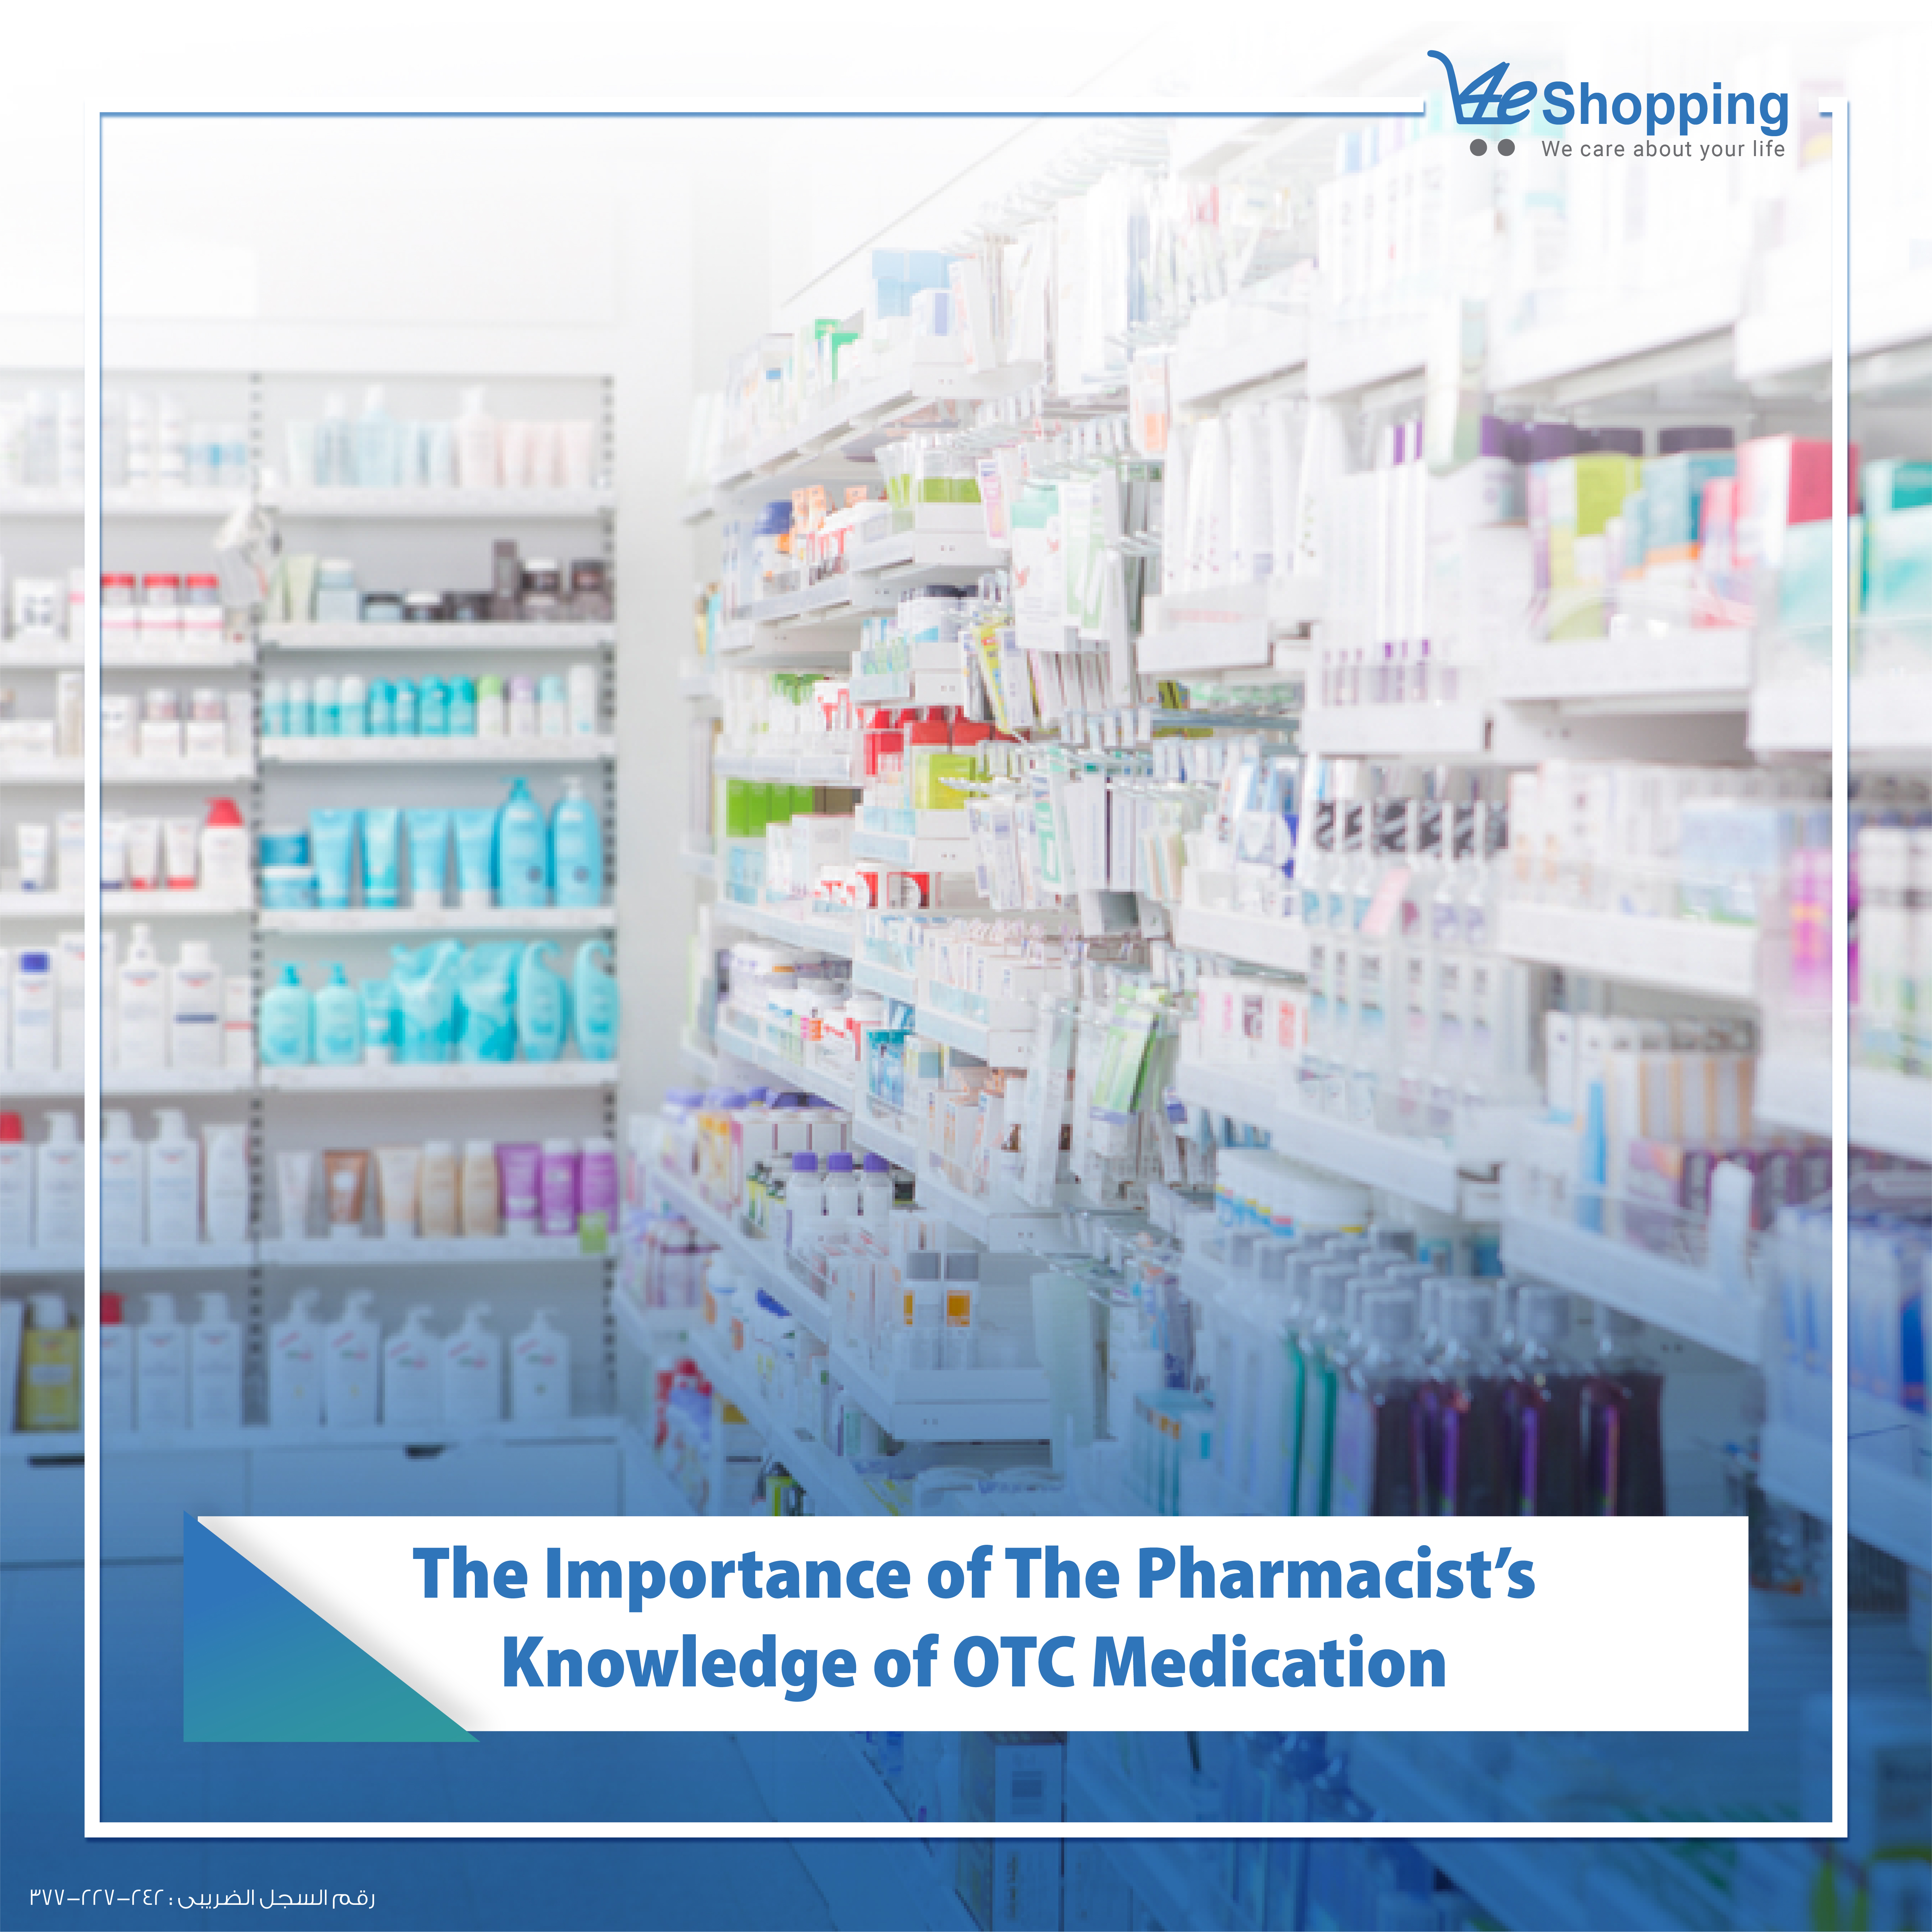 The importance of the pharmacist’s knowledge of OTC medication